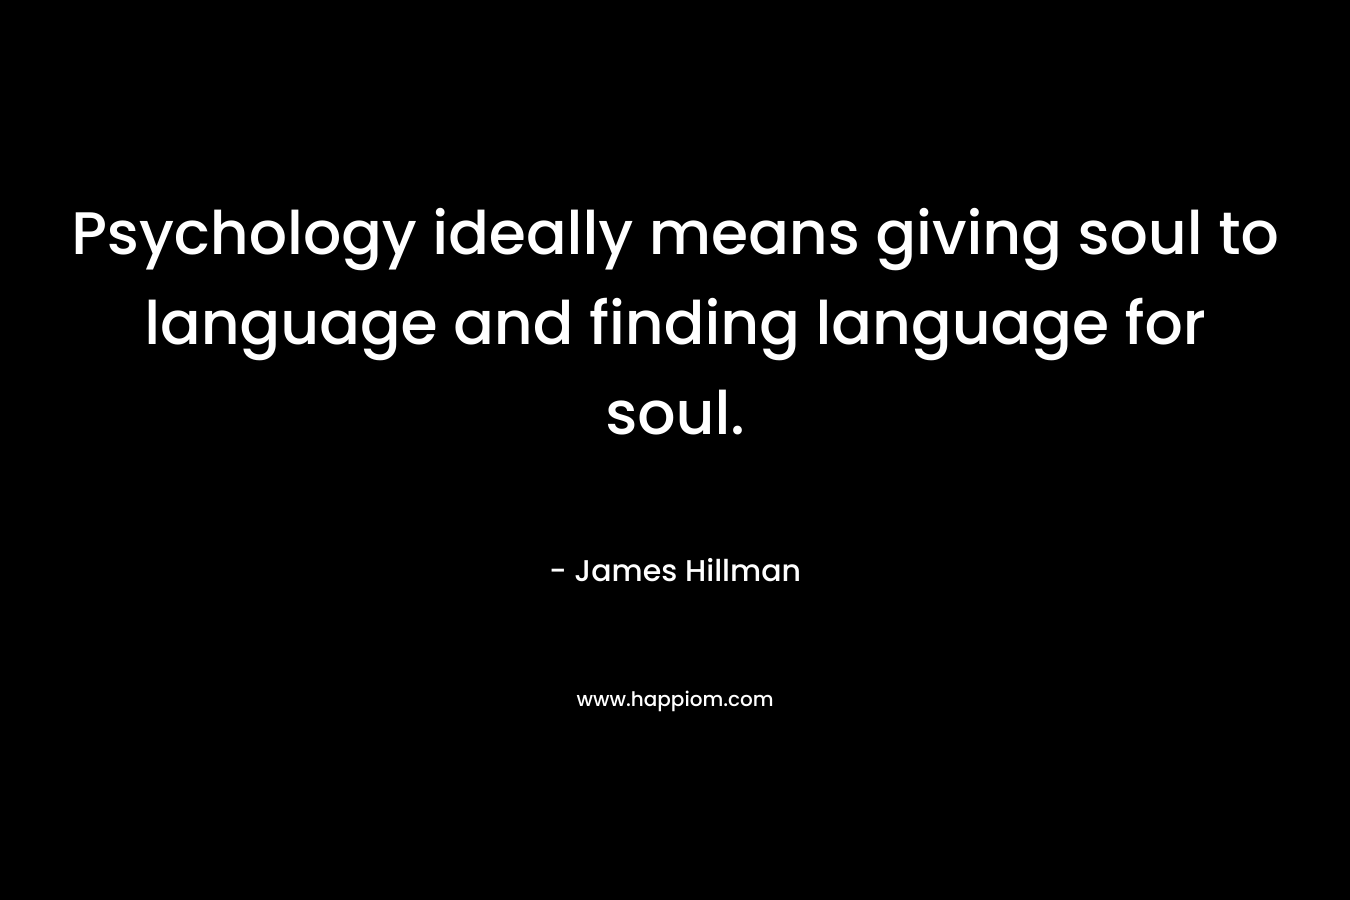 Psychology ideally means giving soul to language and finding language for soul. – James Hillman